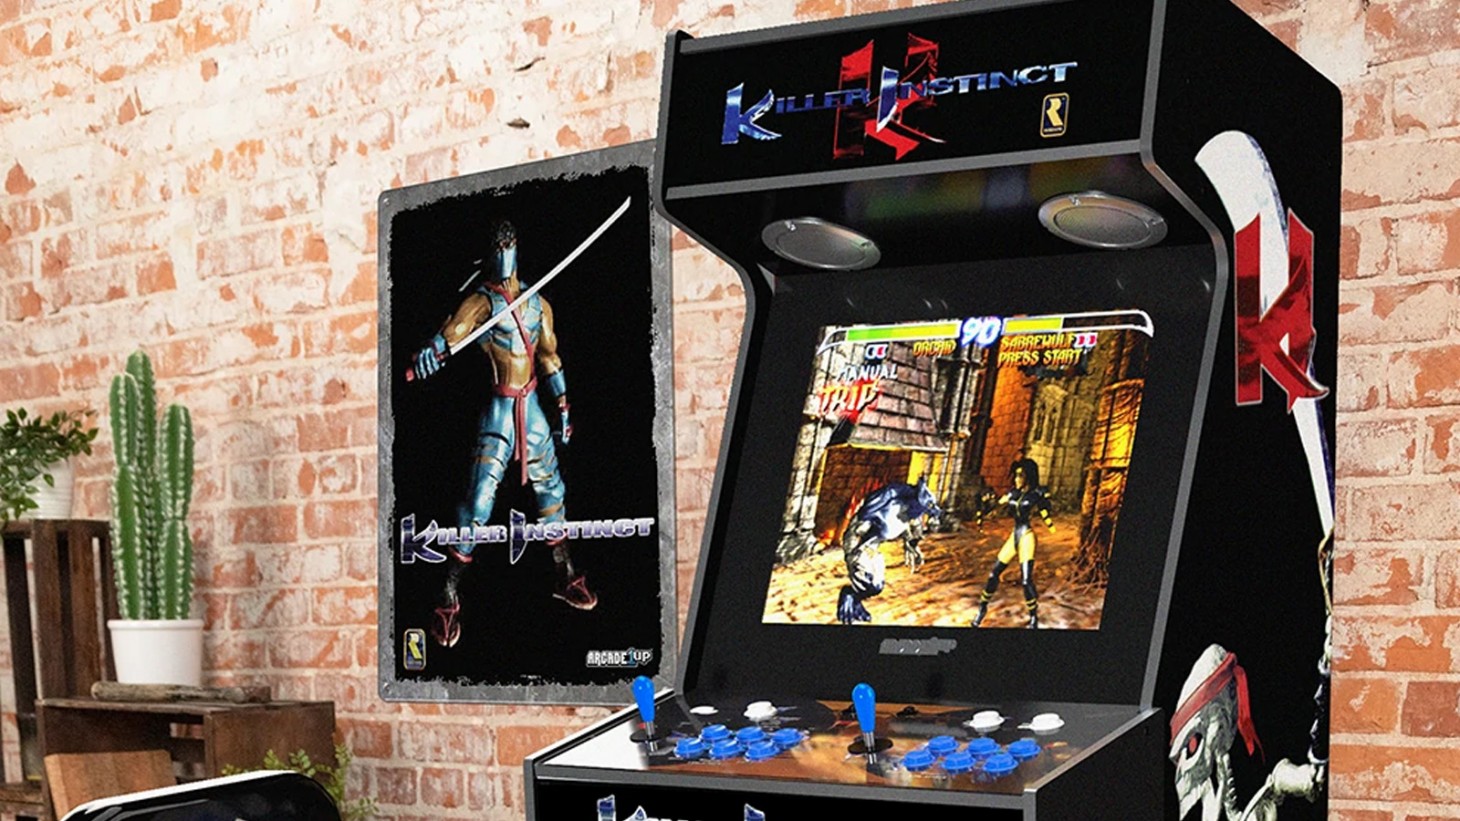 Arcade1up • Compare (100+ products) see the best price »